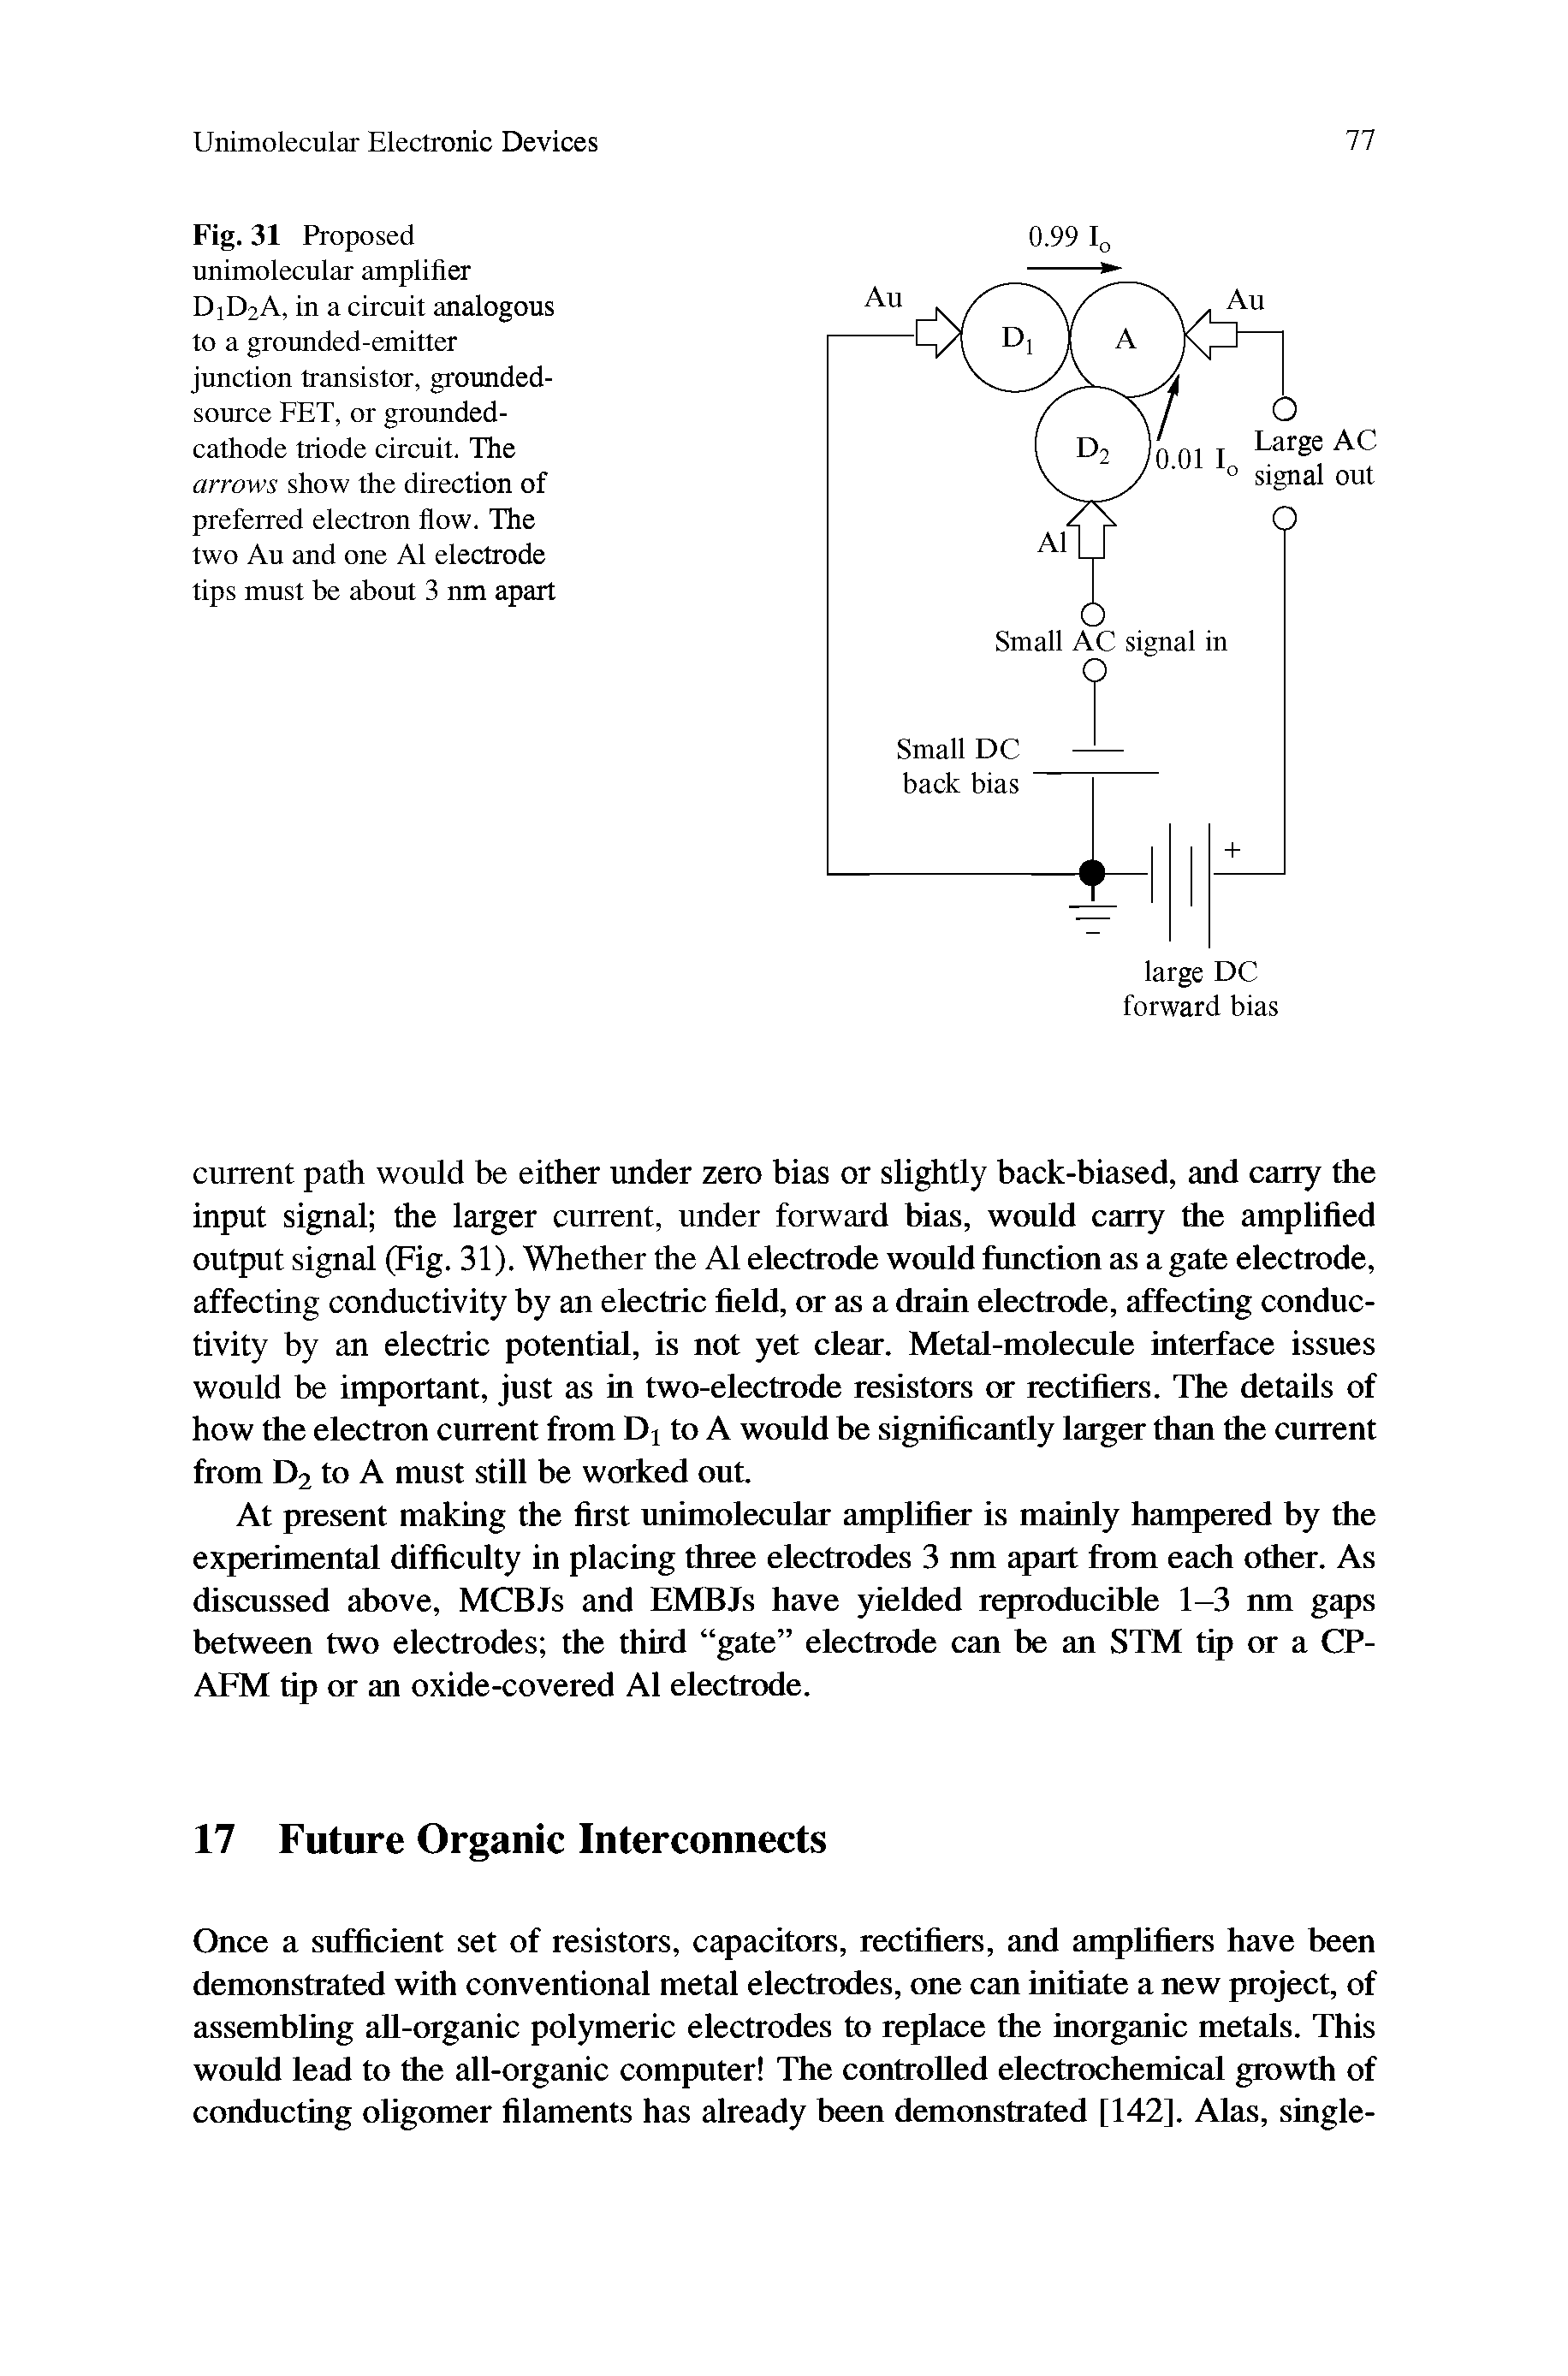 Fig. 31 Proposed unimolecular amplifier DiD2A, in a circuit analogous to a grounded-emitter junction transistor, grounded-source FET, or grounded-cathode triode circuit. The arrows show the direction of preferred electron flow. The two Au and one A1 electrode tips must be about 3 nm apart...